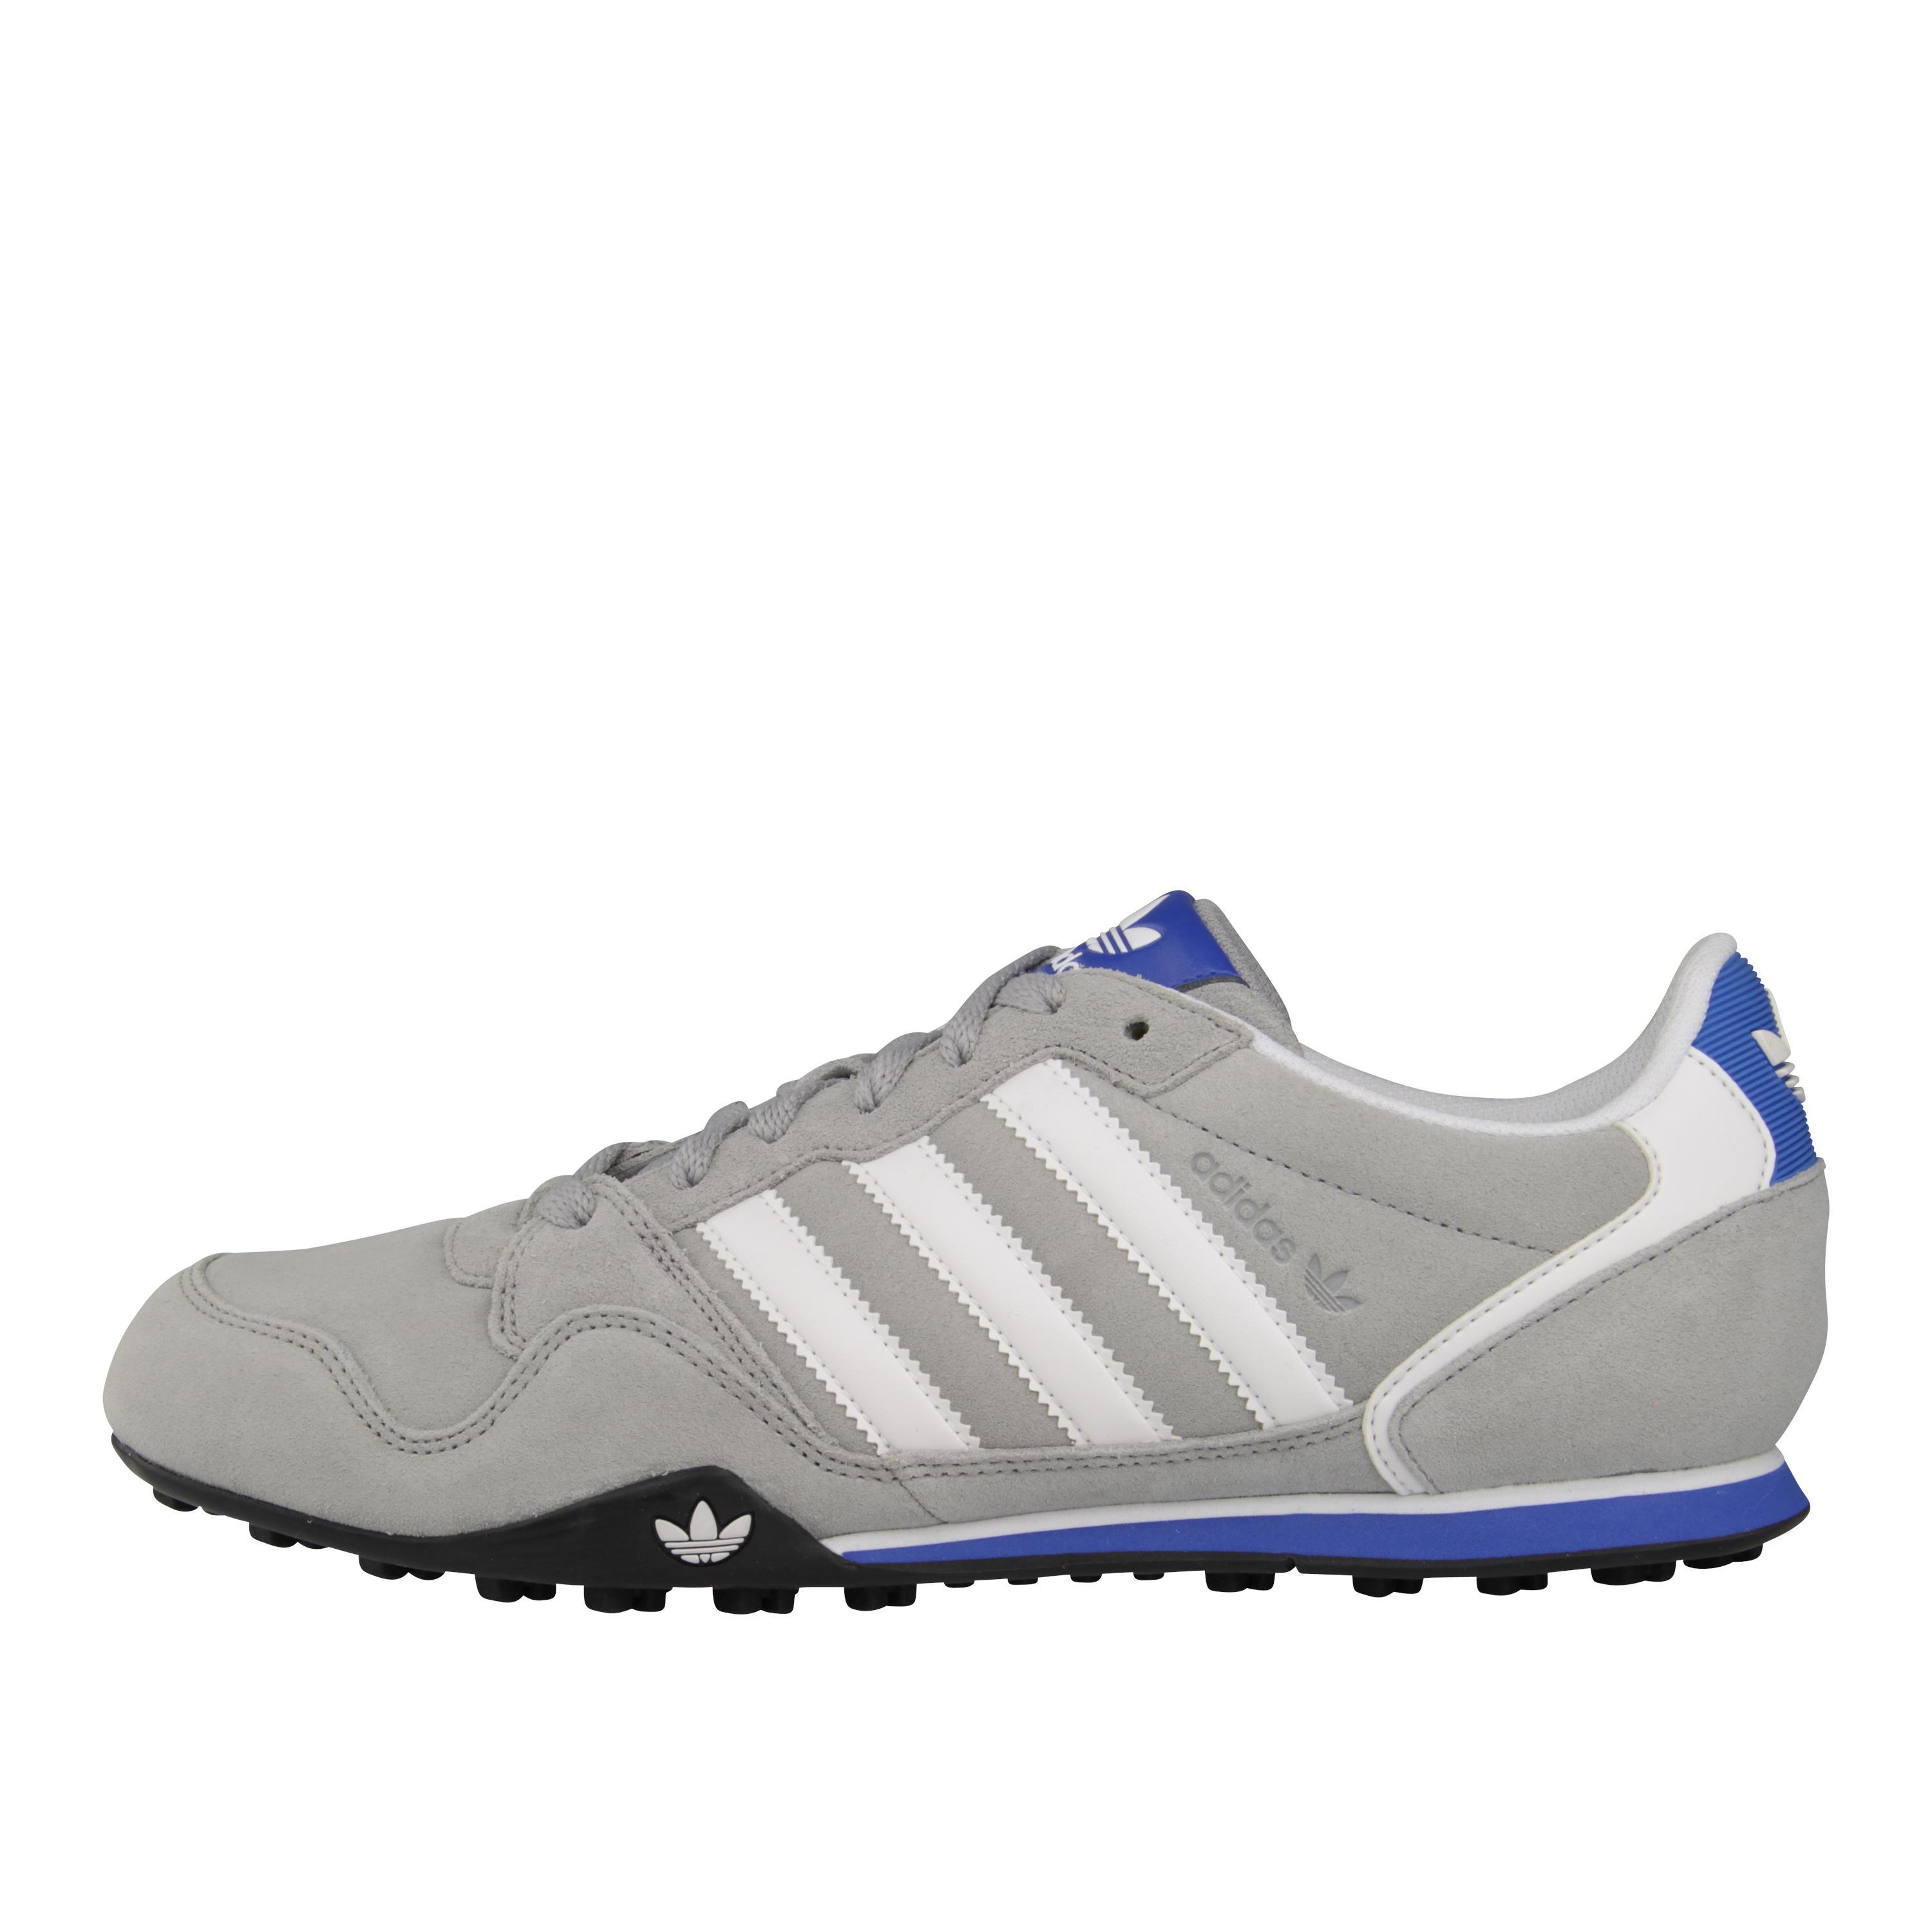 adidas zx country